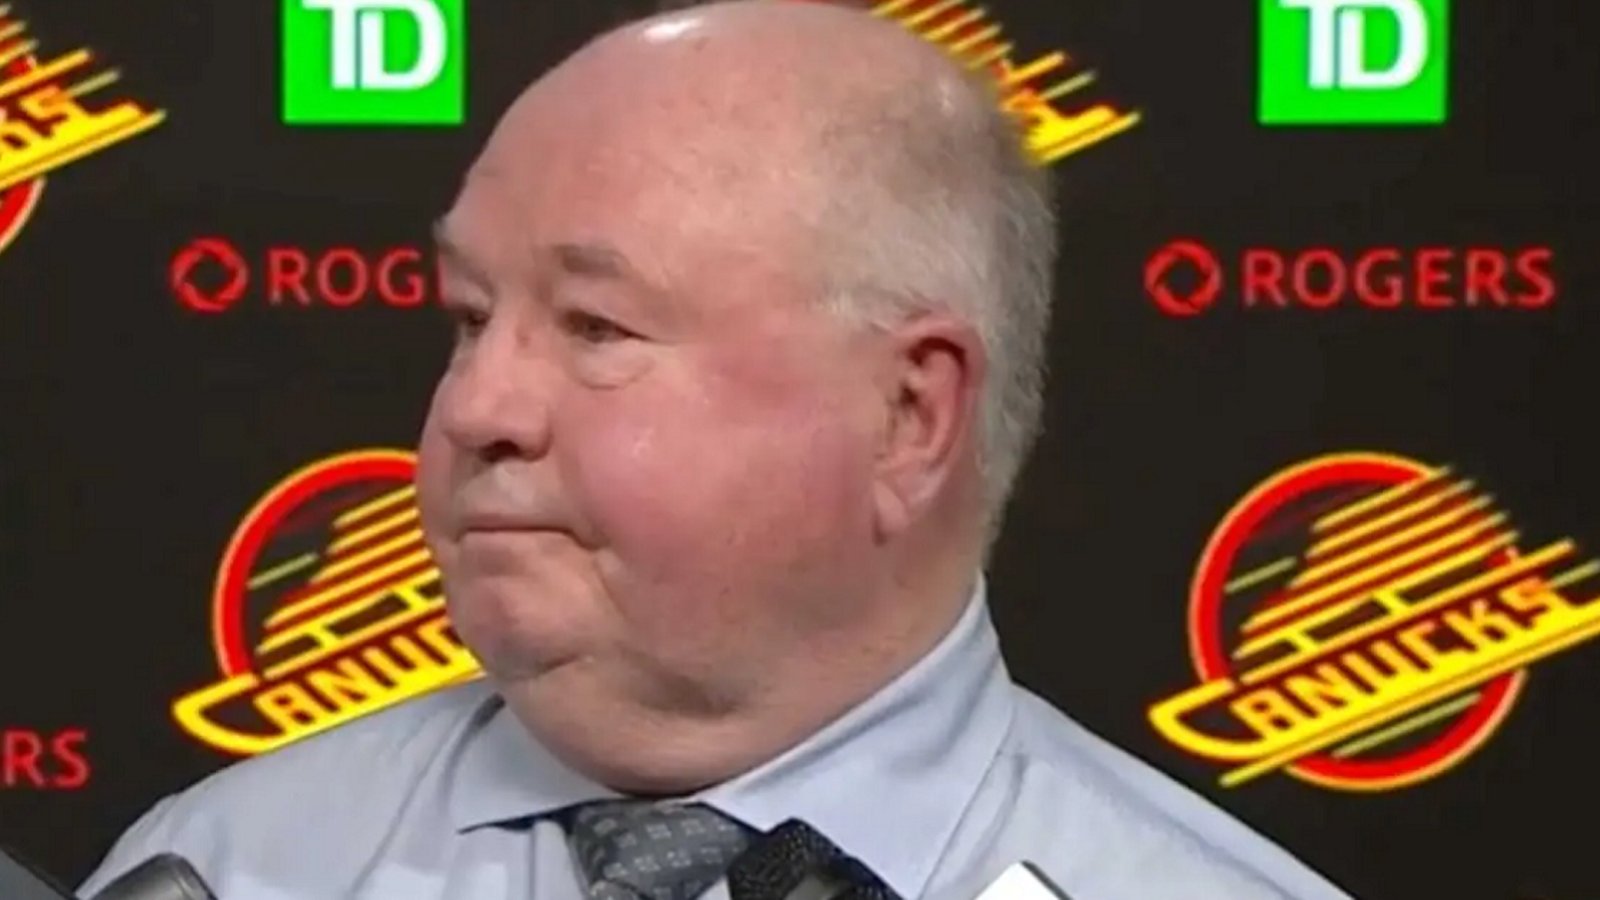 Canucks issue statement on Boudreau, get destroyed by their own fans.